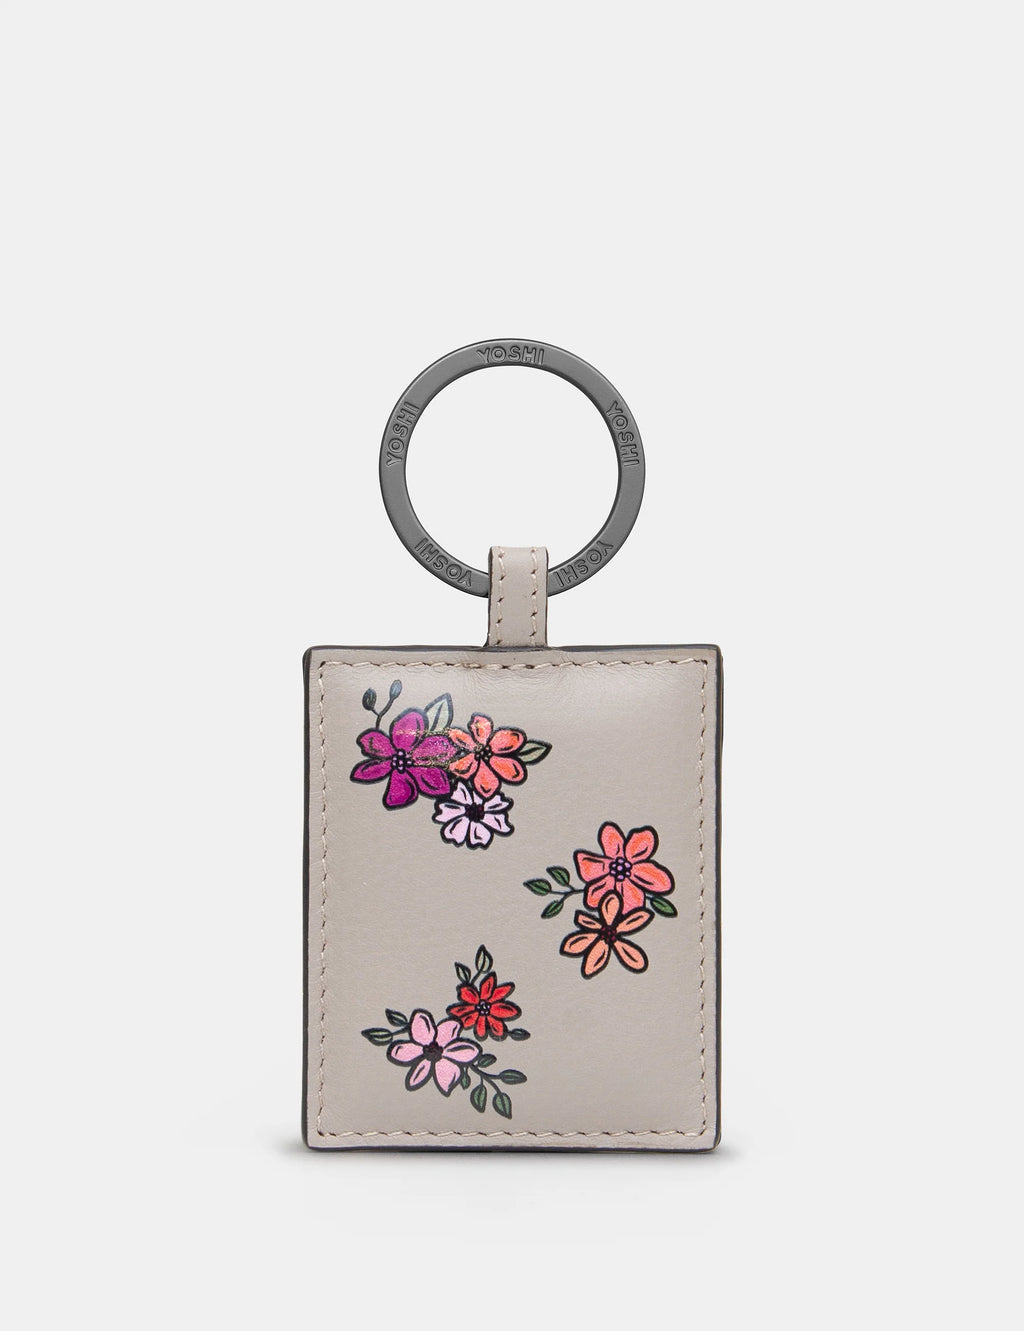 *NEW IN* Yoshi - Ditsy Floral Leather Key Ring (Copy)